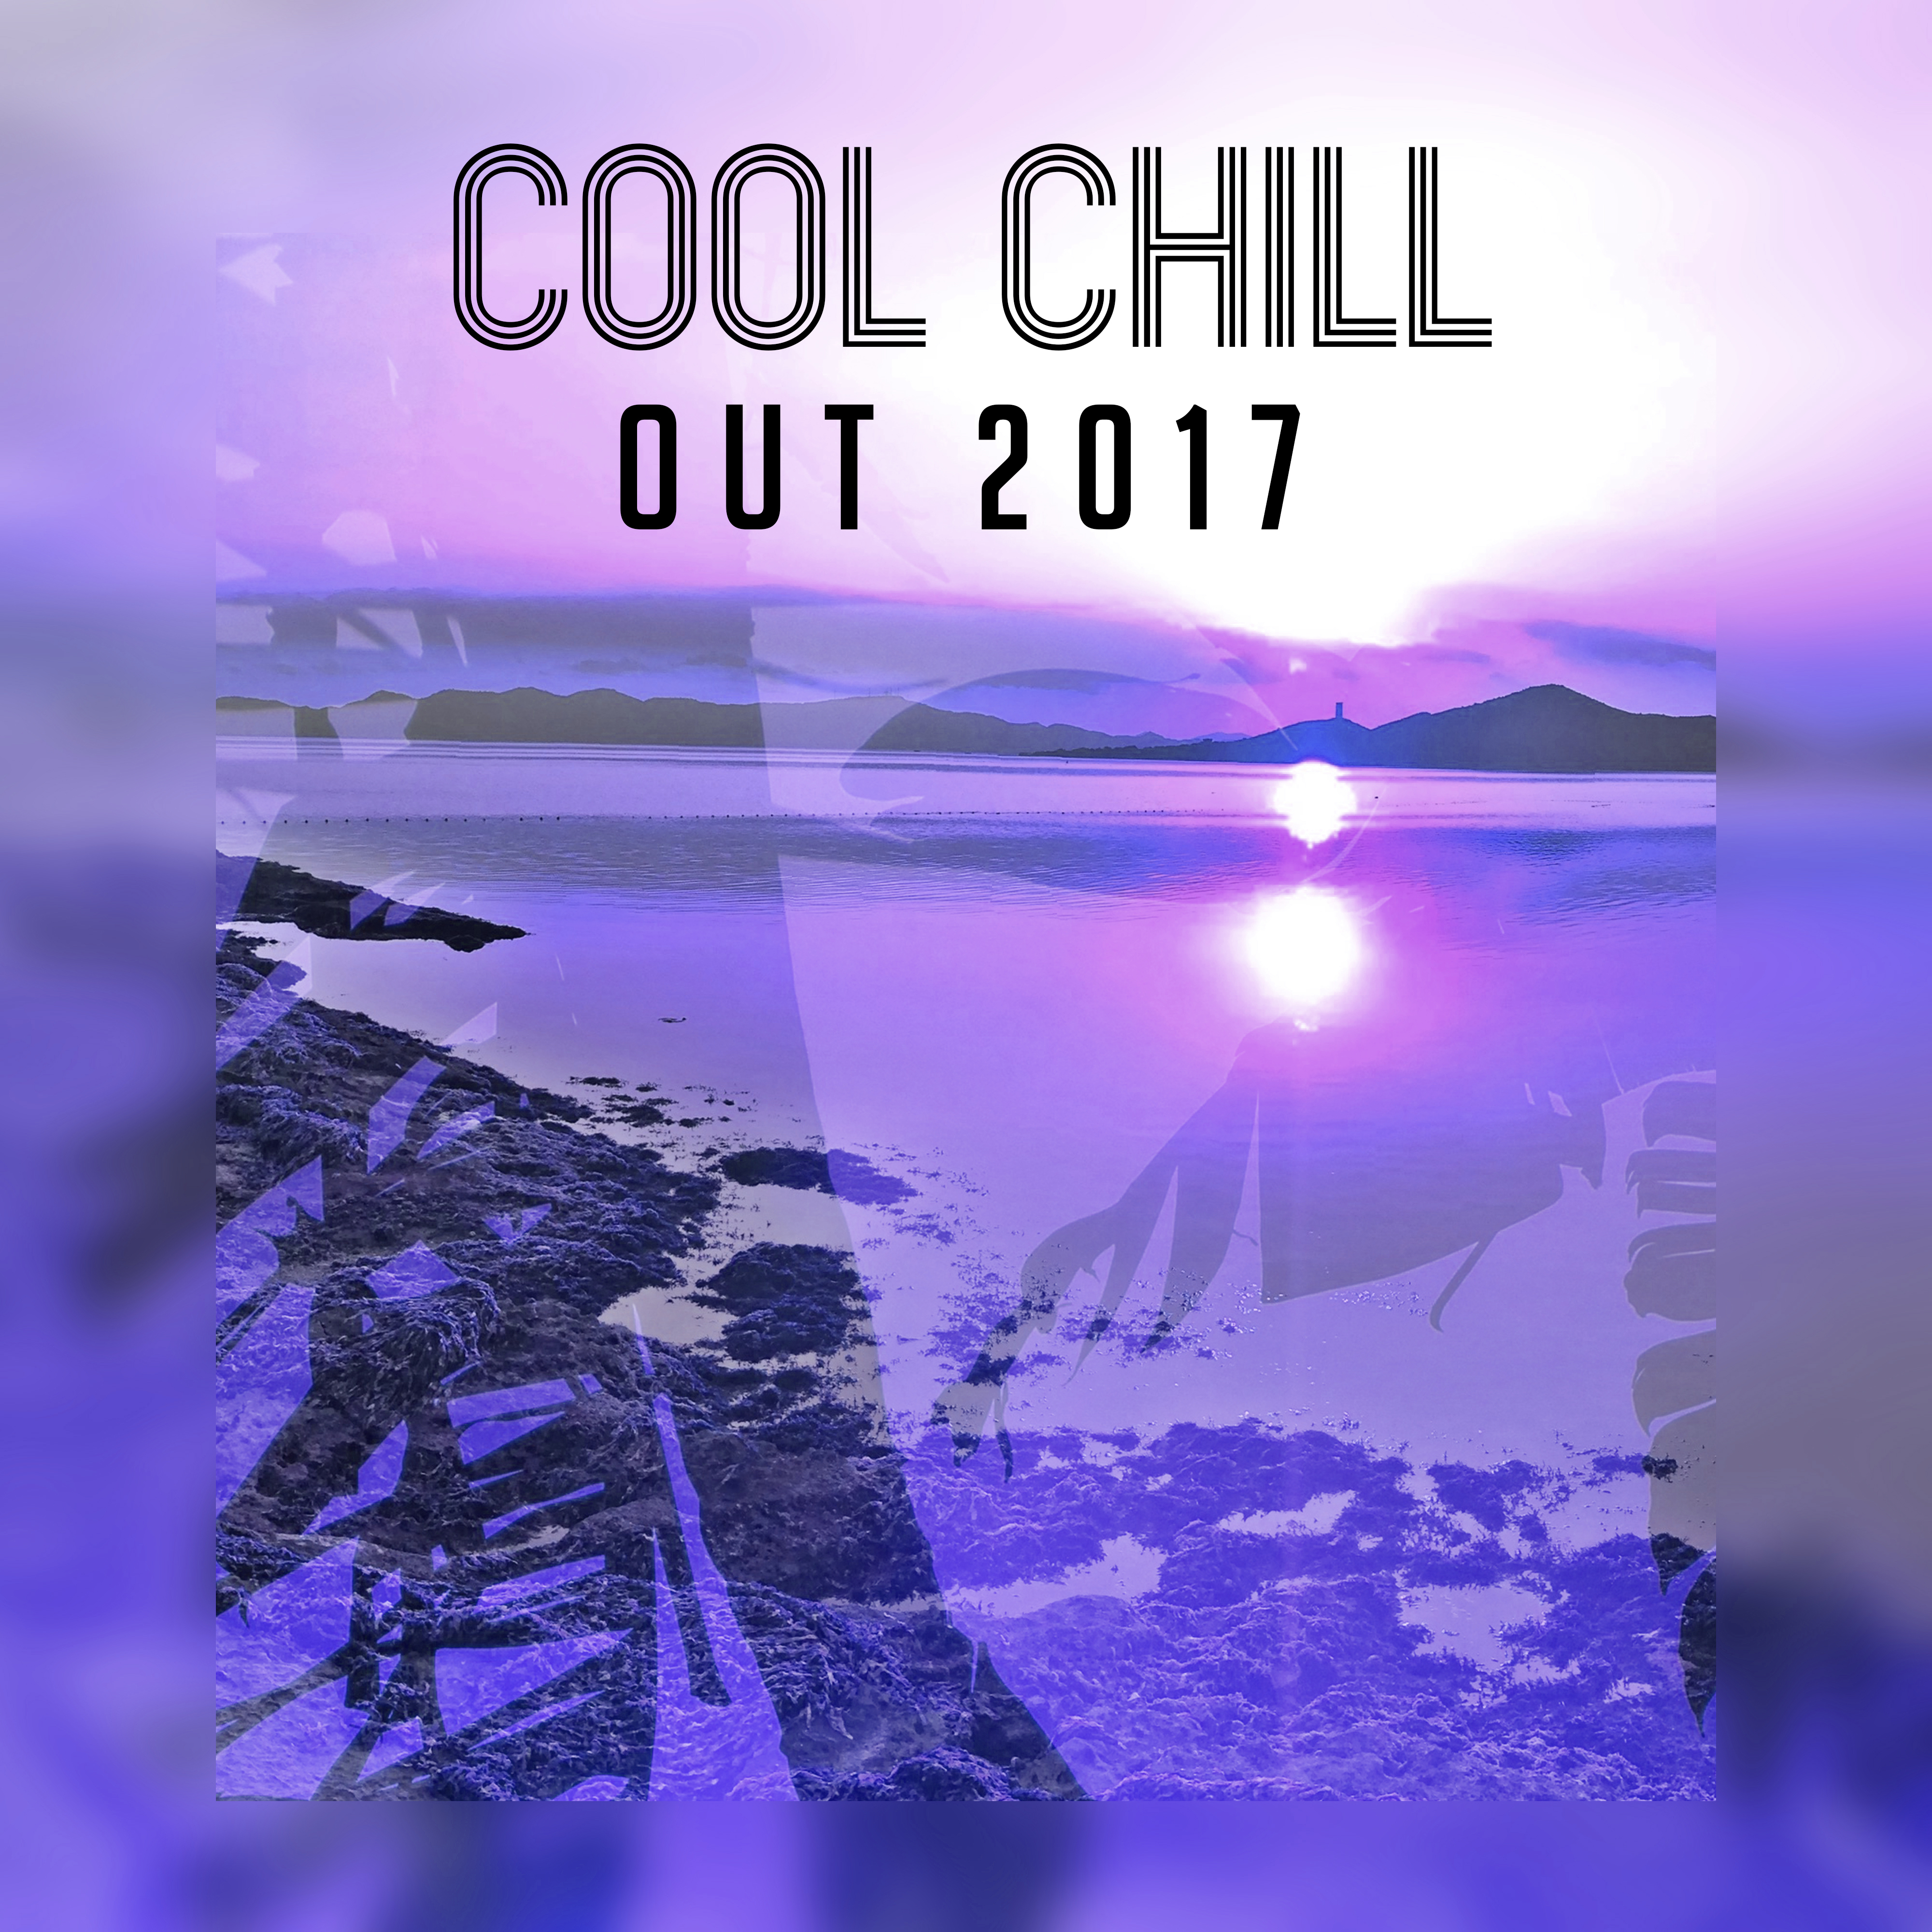 Cool Chill Out 2017 – Summer Lounge 2017, Chill Out Music, Relax, Dance